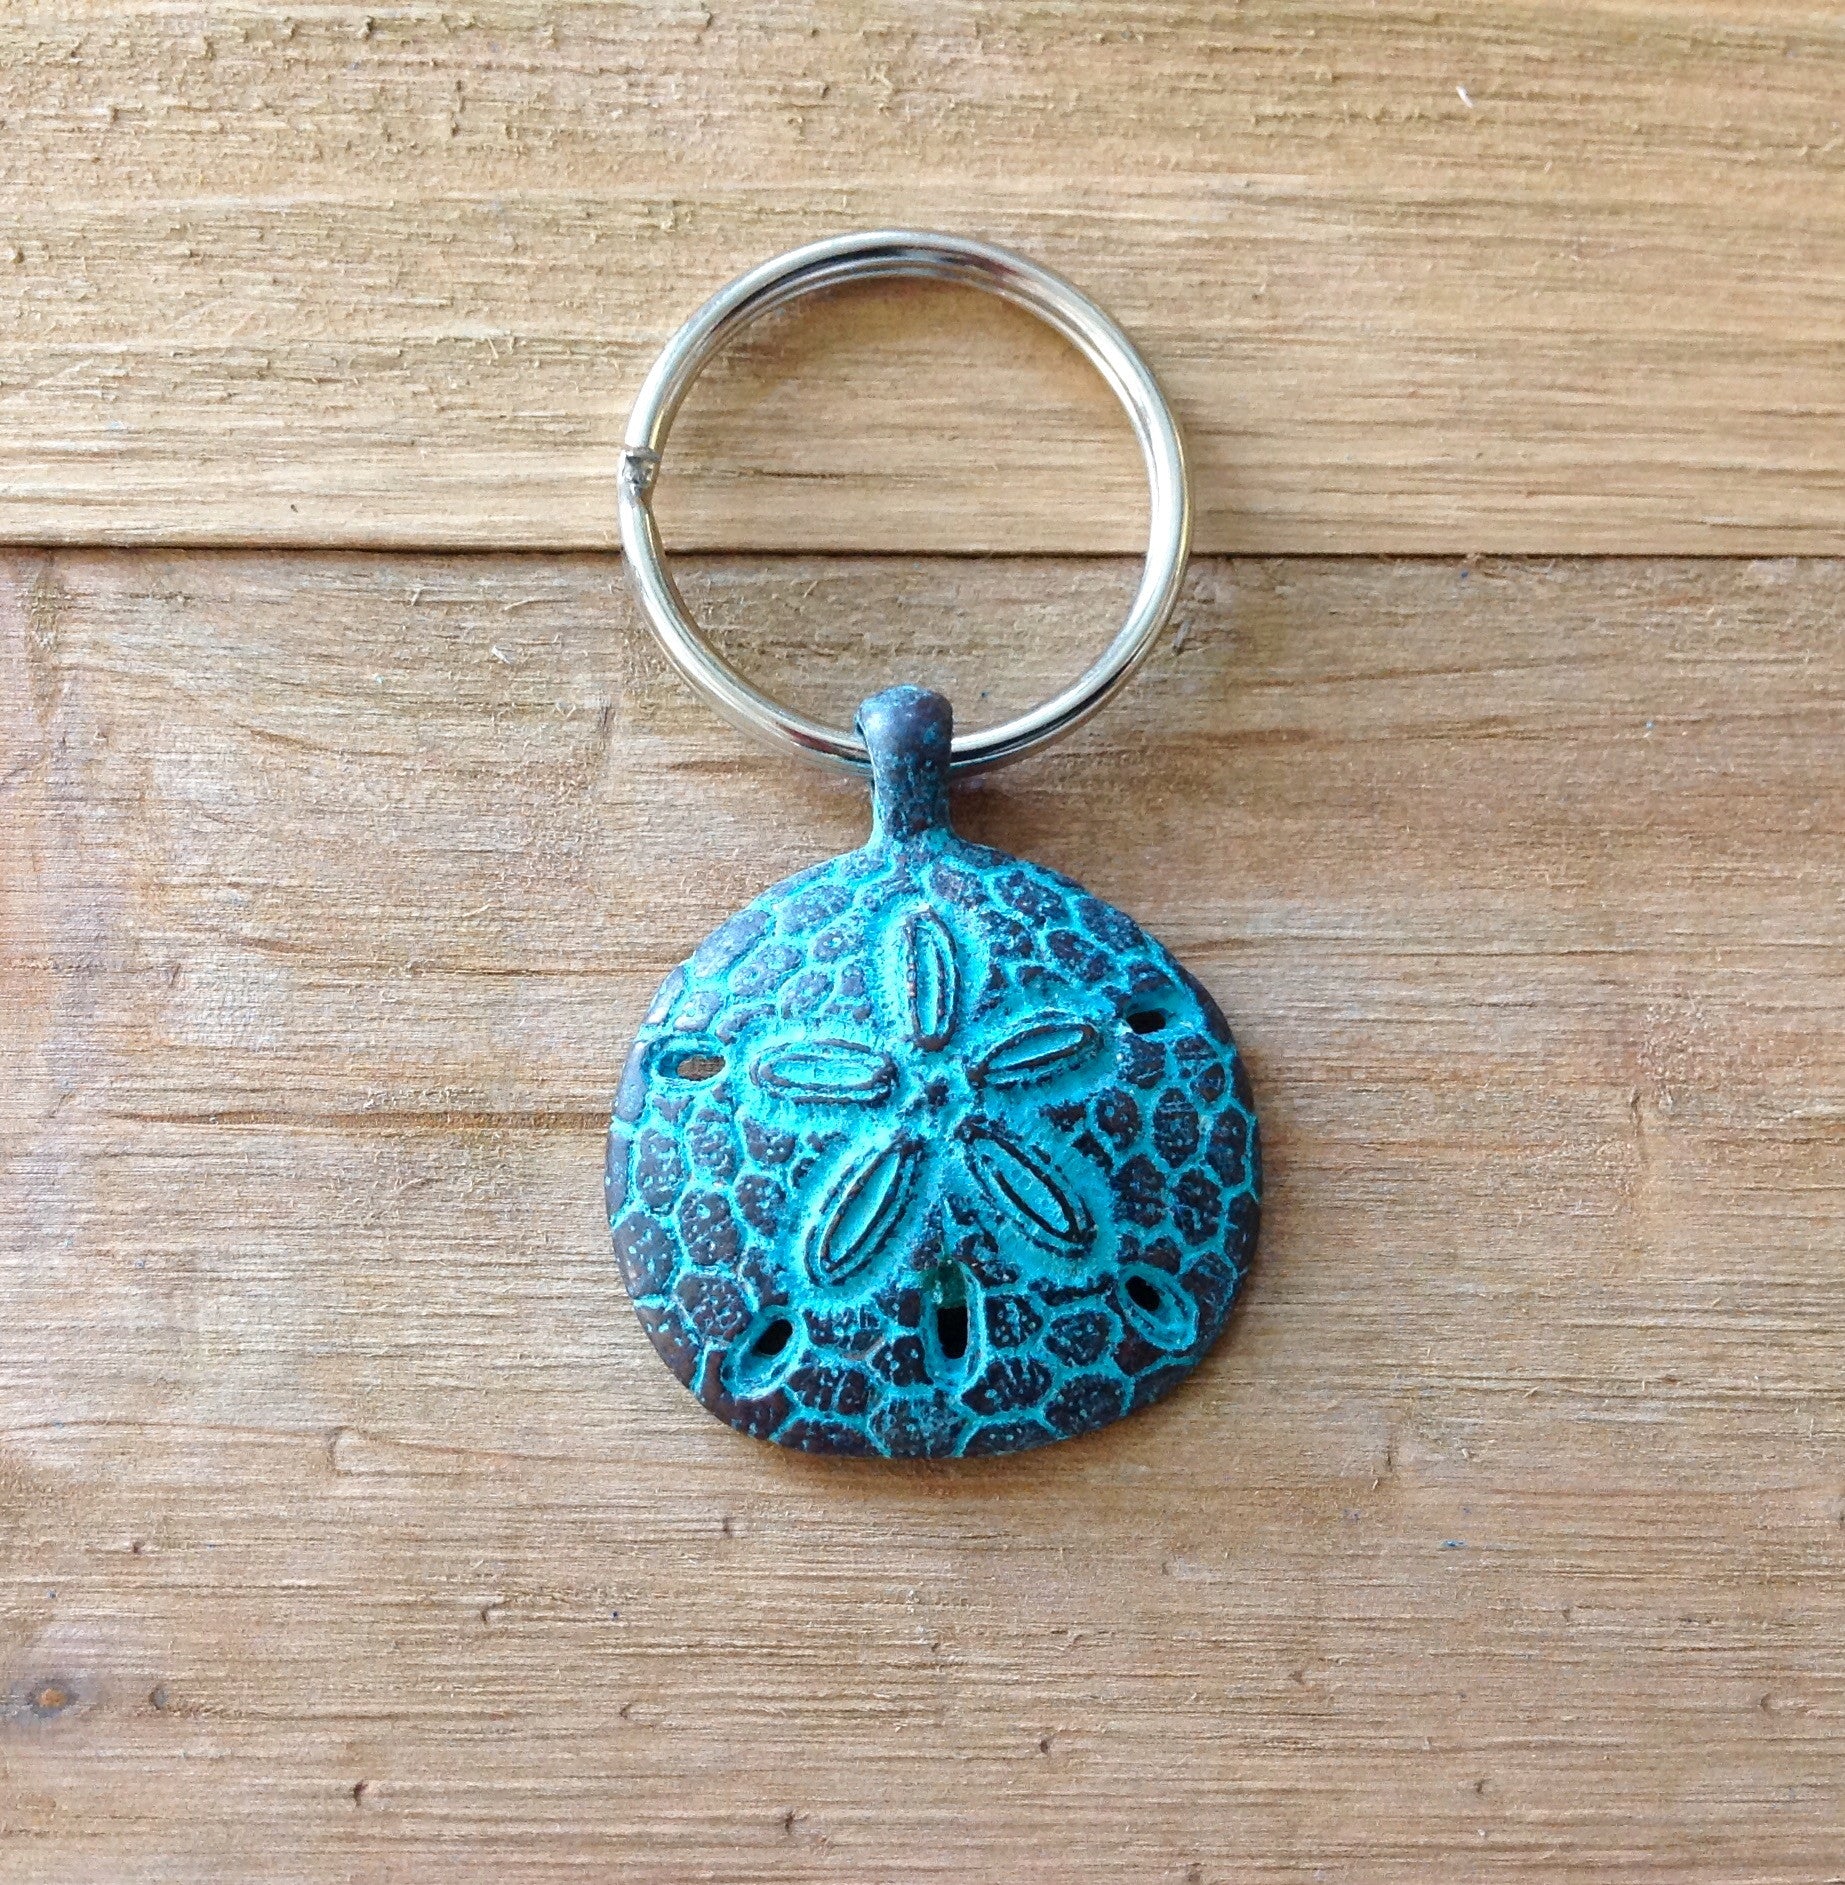 Tree of Life Key Ring Purse Hook - Keychains - Jewelry